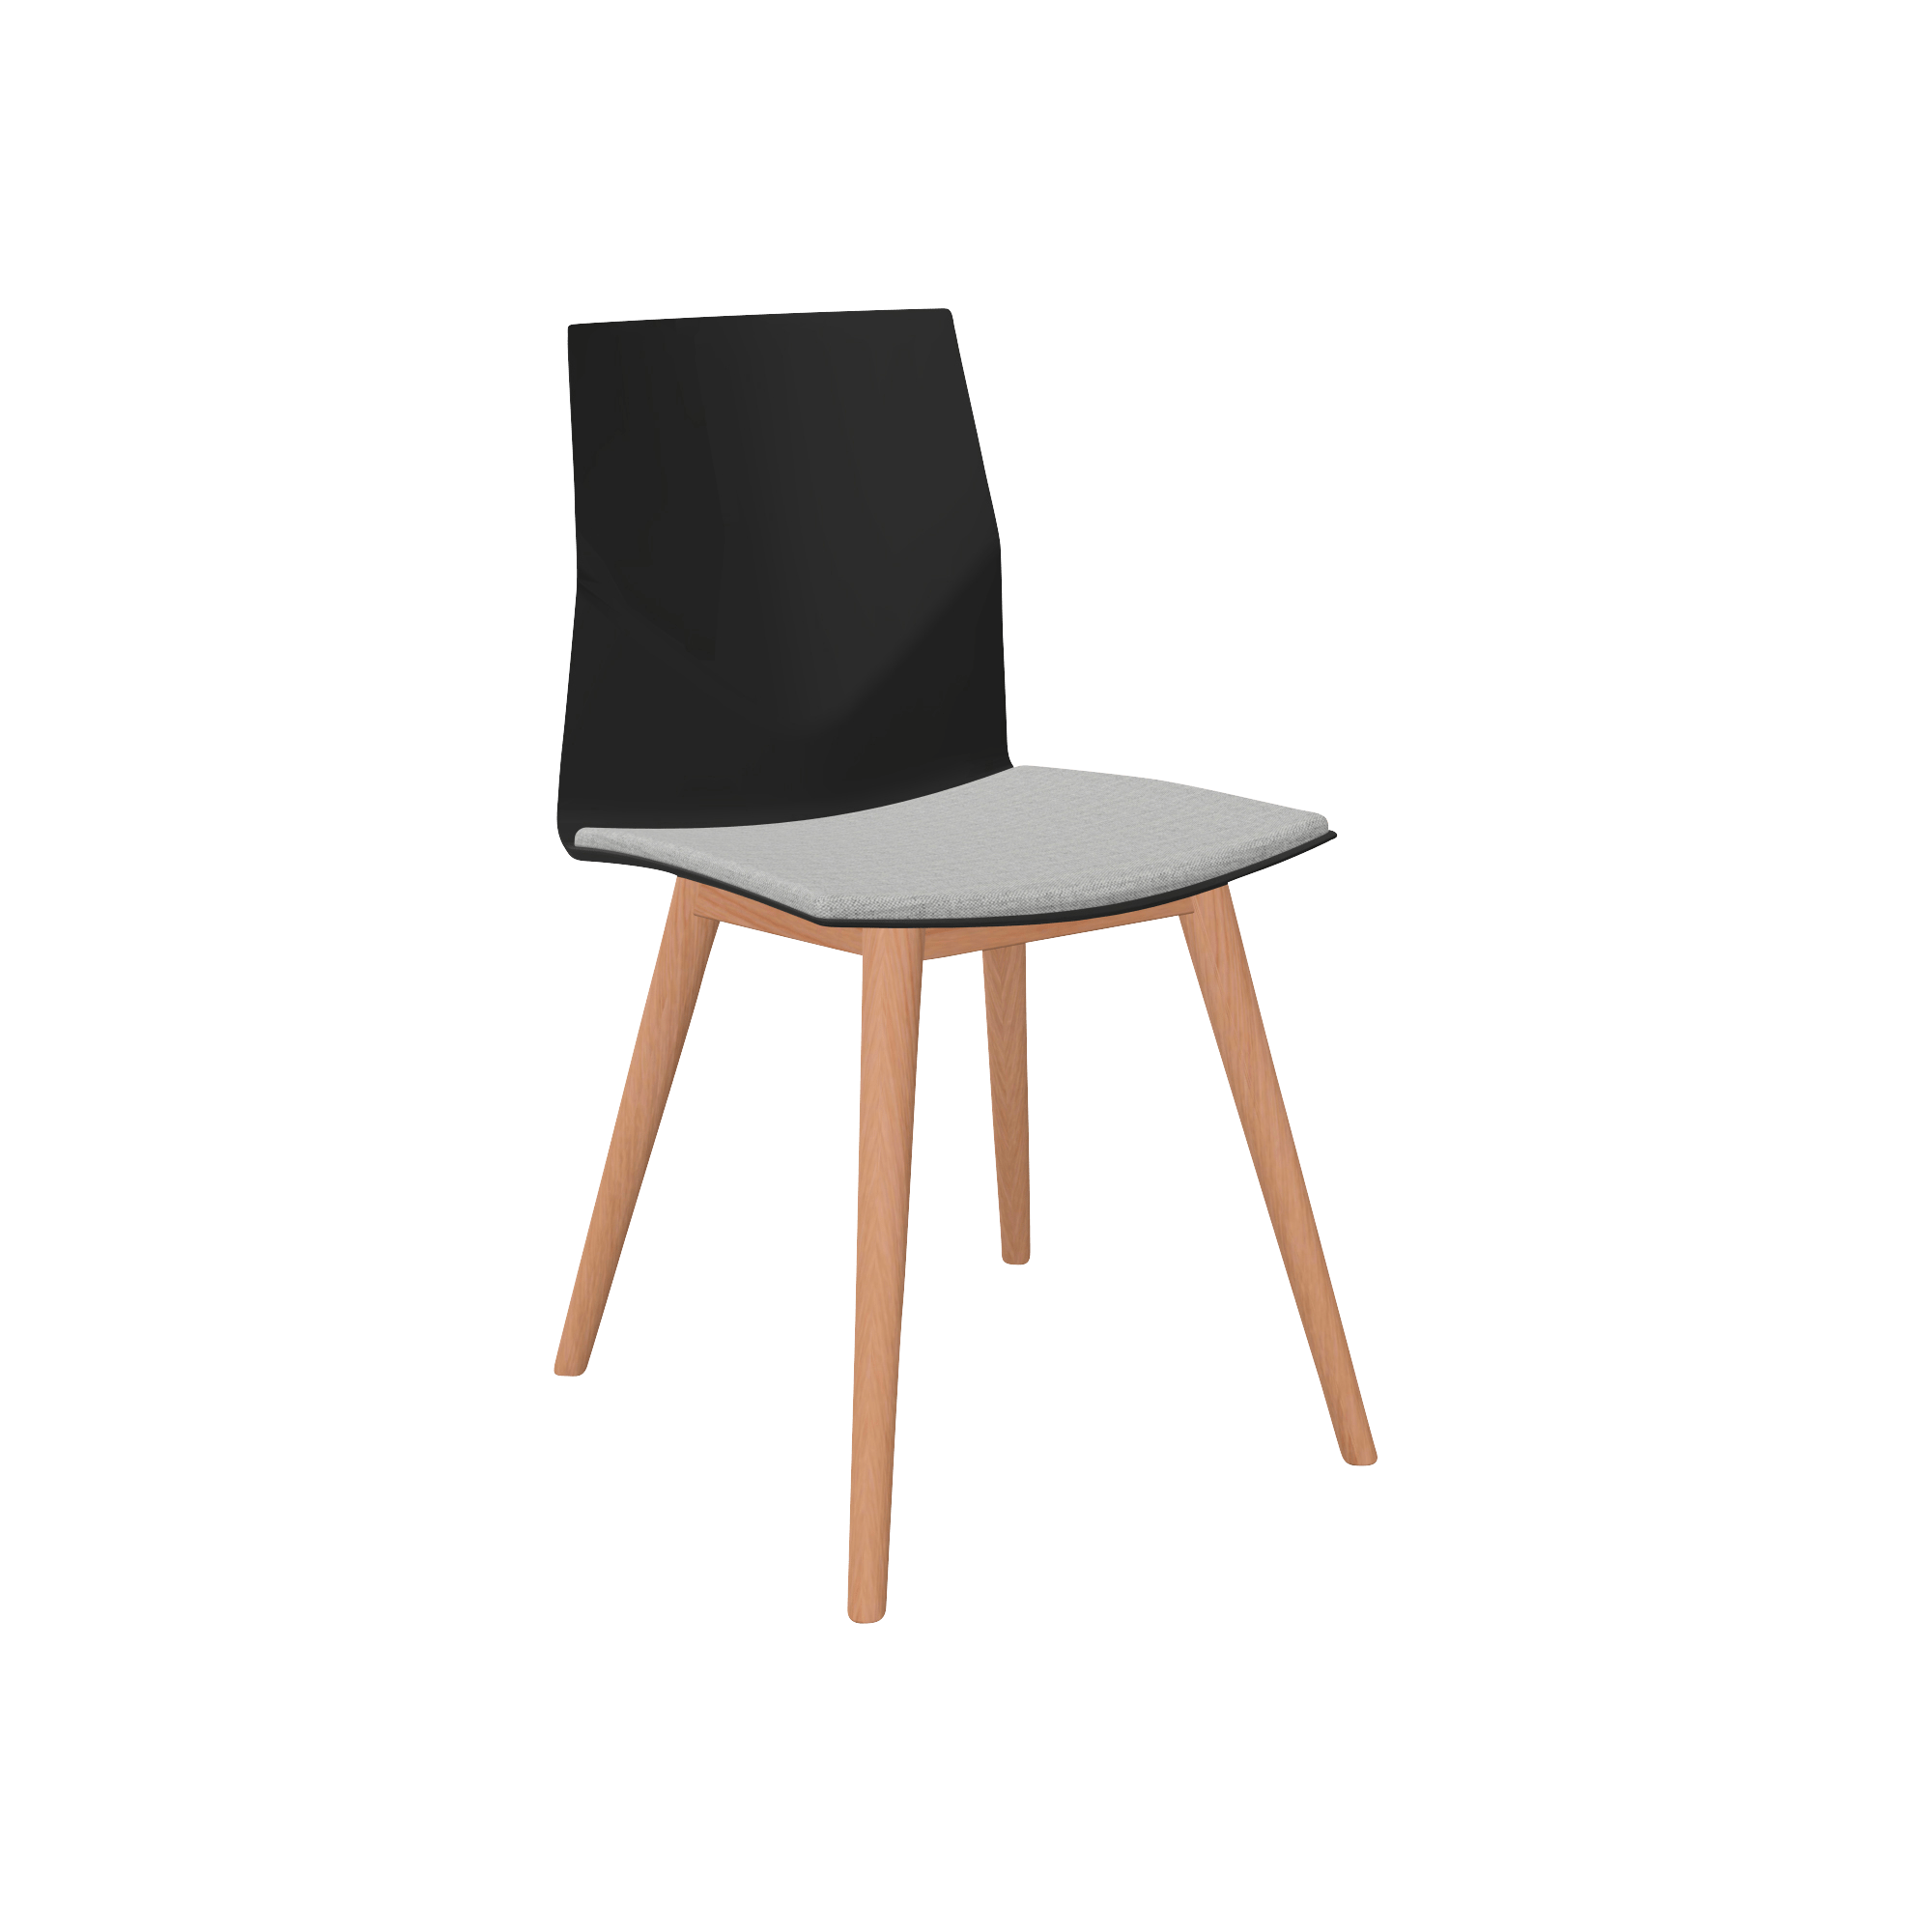 black designer office chair with wooden legs